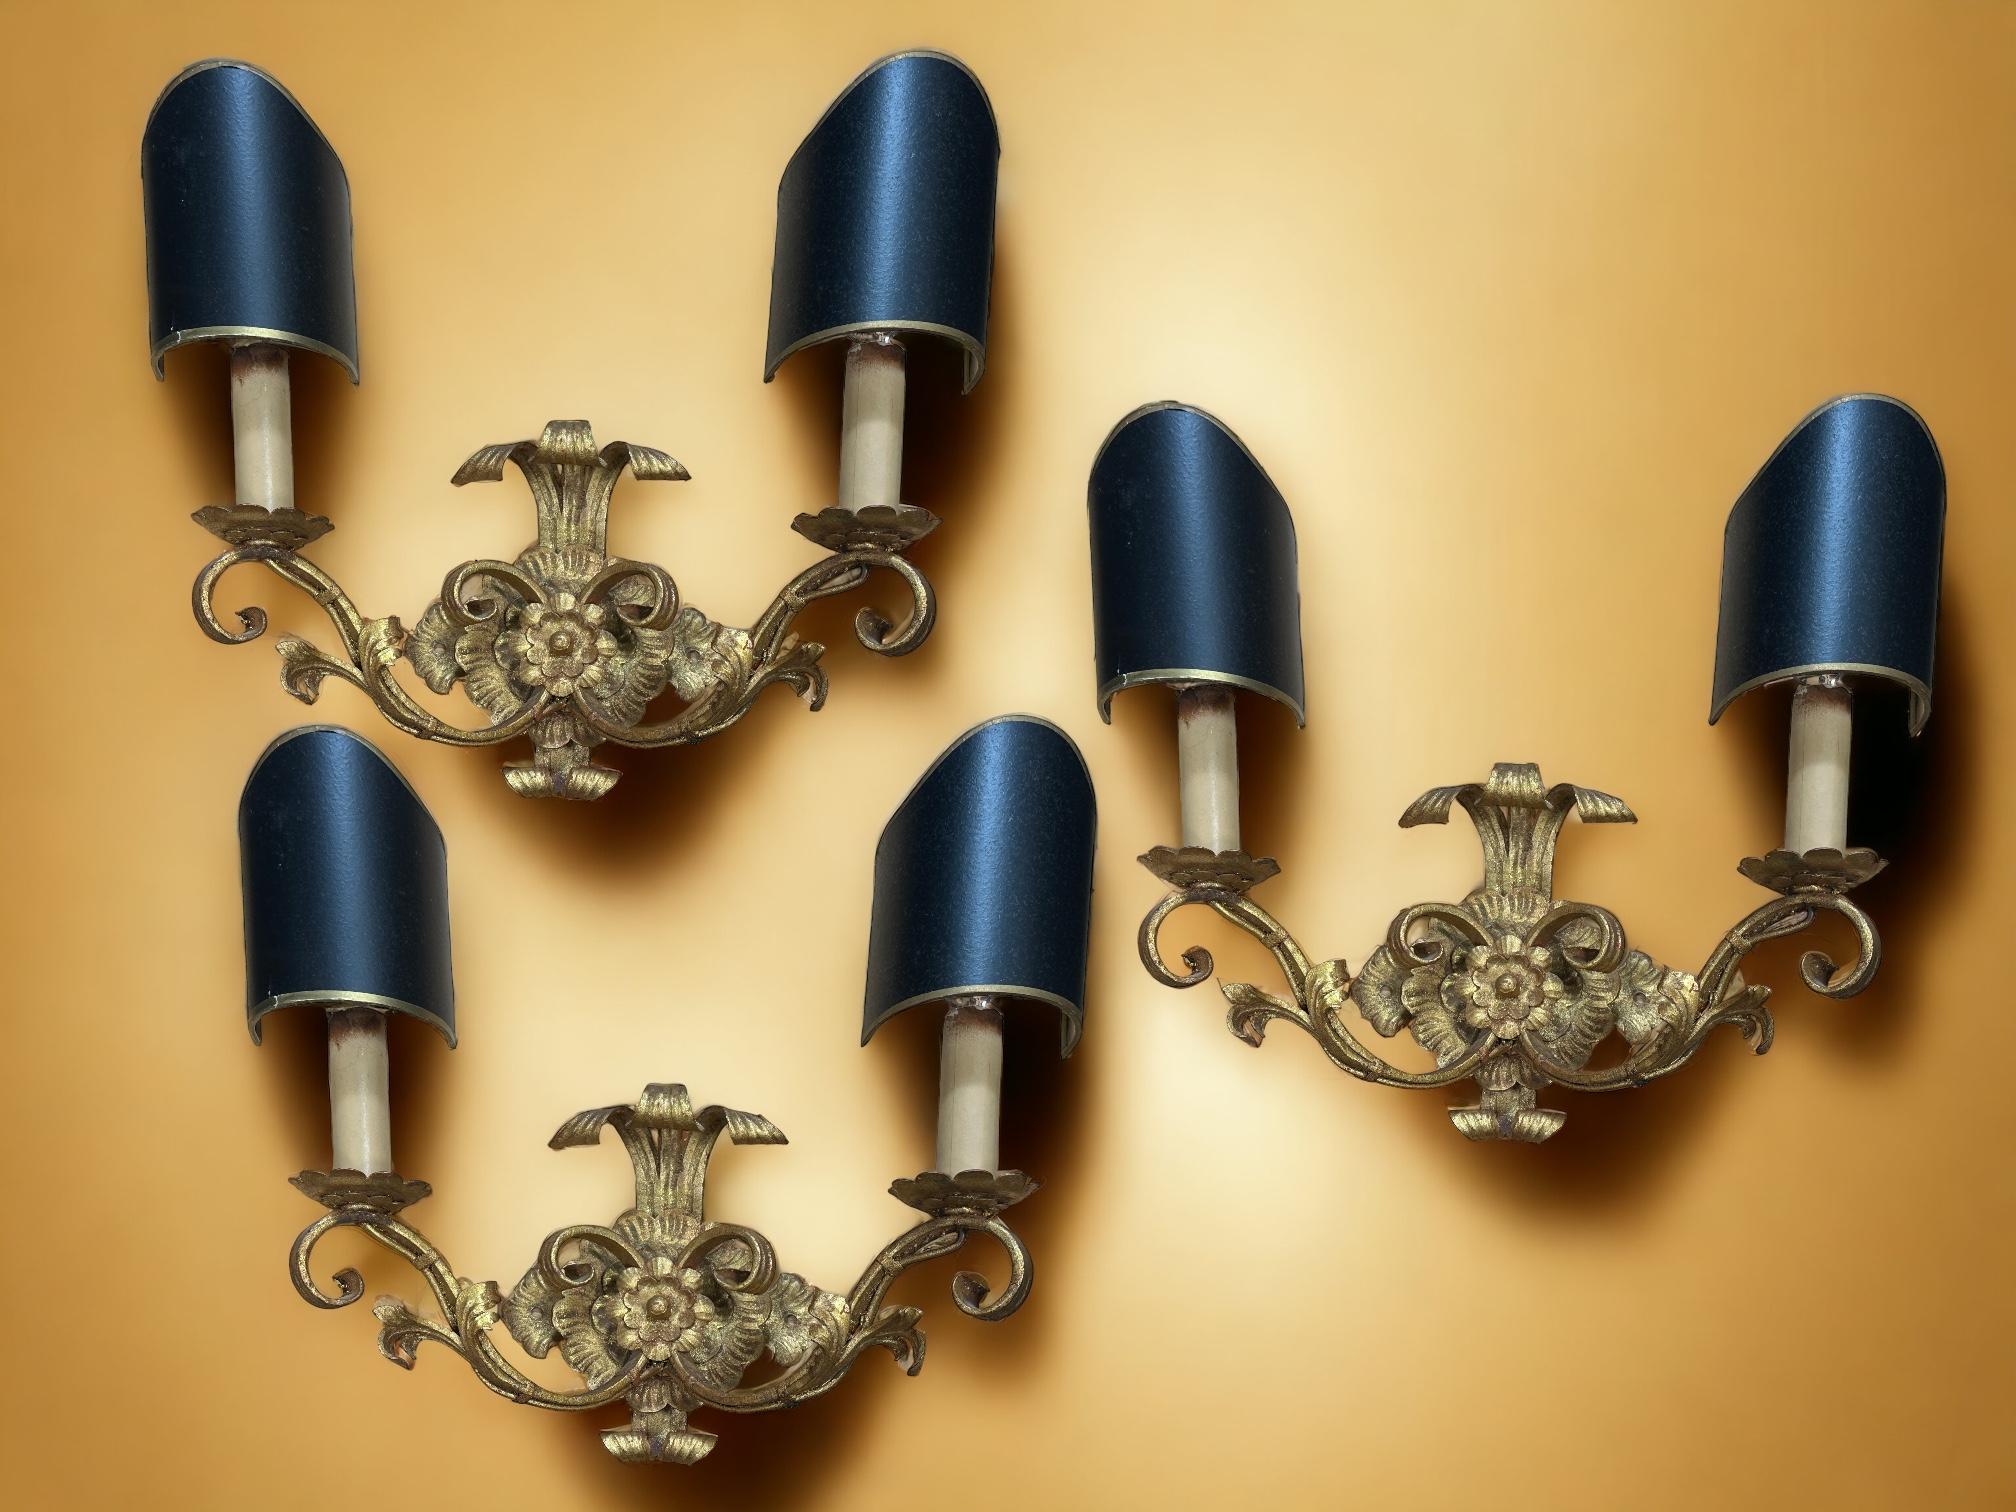 A set of three mid-century Hollywood Regency wall sconces with gold leaf. Two European E14 candelabra lamps with up to 40 watts per socket are required for each lamp. The wall lights have a beautiful patina and add an eclectic statement to any room.